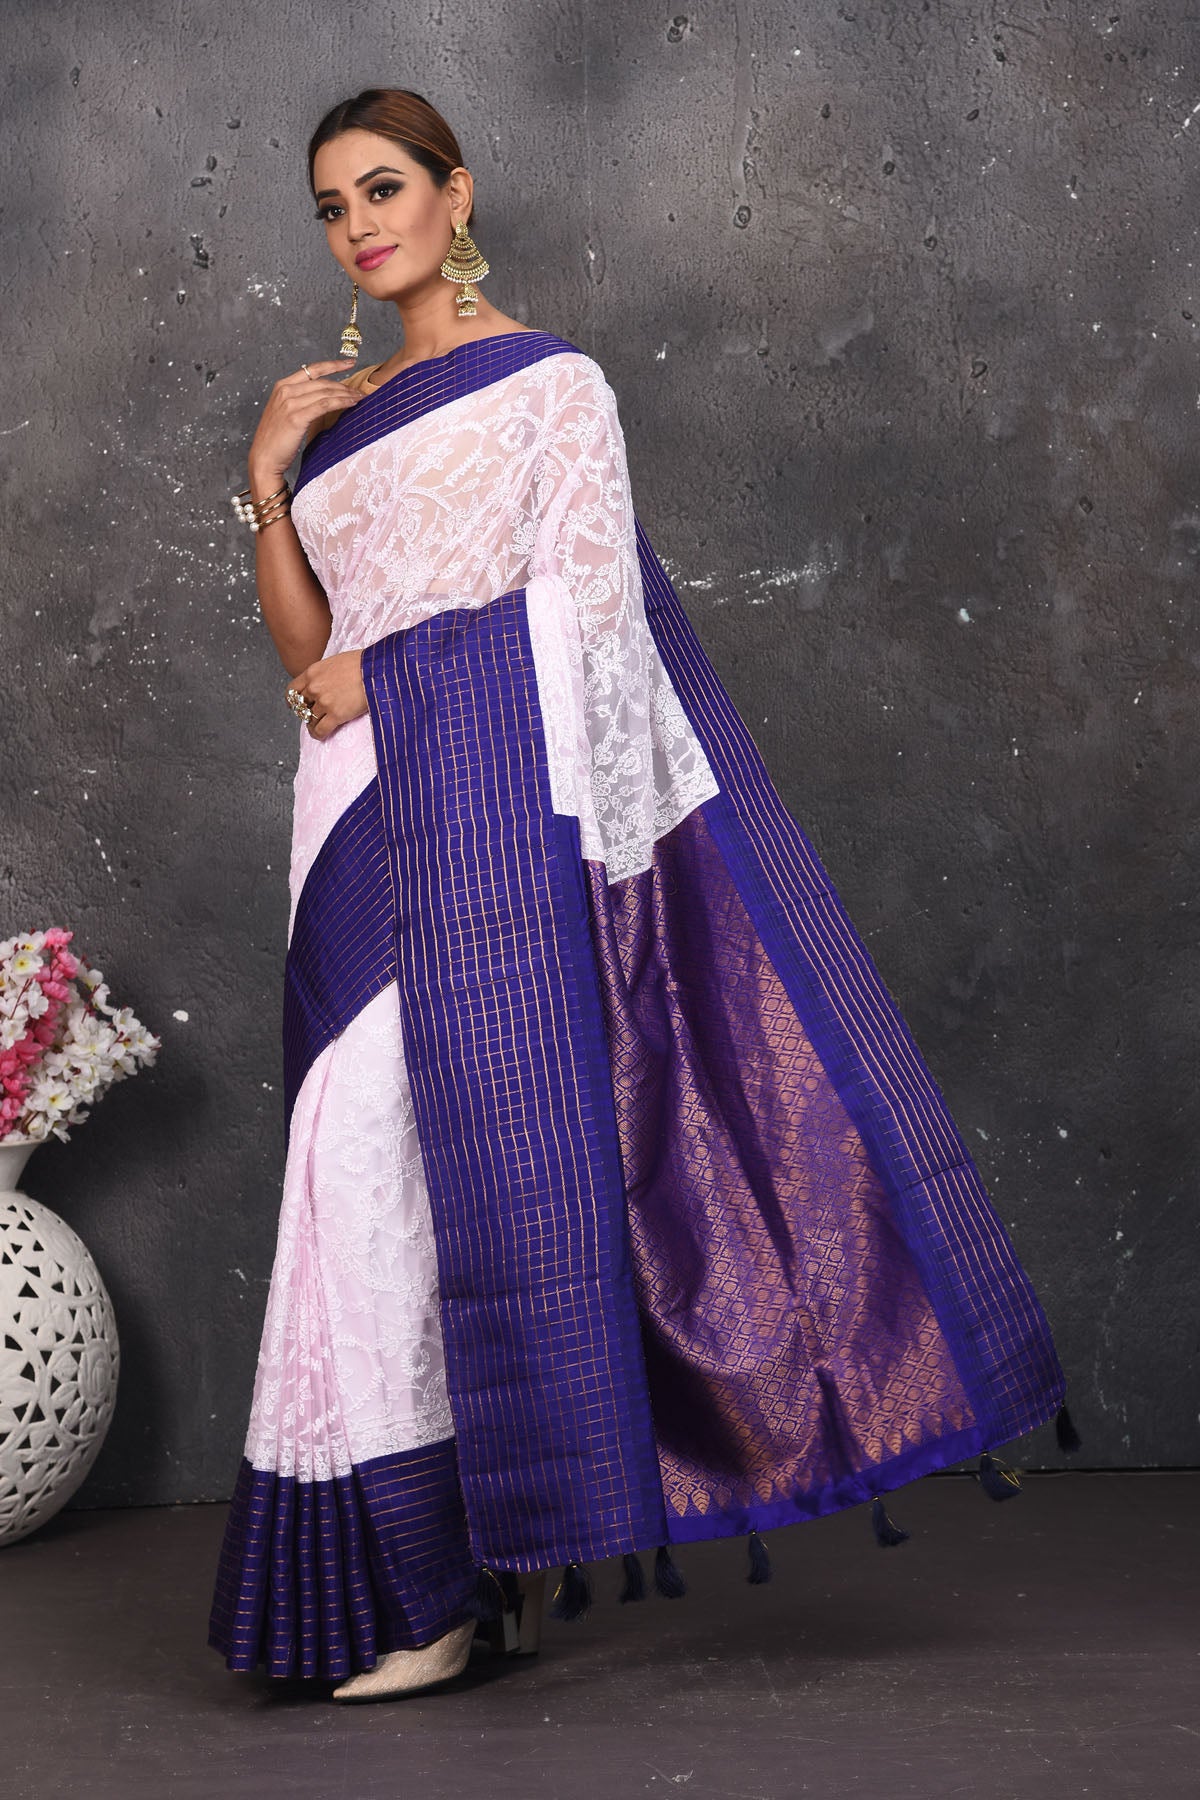 Buy this exquisite Off-white and violet chiffon saree with chikankari hand-embroidered online in USA. Style this lucknawi sari with a potli bag and high heels for a flawless look which has gorgeous heavy pallu with dull-gold zari work. This saree is definitely the epitome of beauty and a must have in your collection. Buy designer handwoven chikankari sari with any blouse from Pure Elegance Indian saree store in USA.- Full view with open pallu.